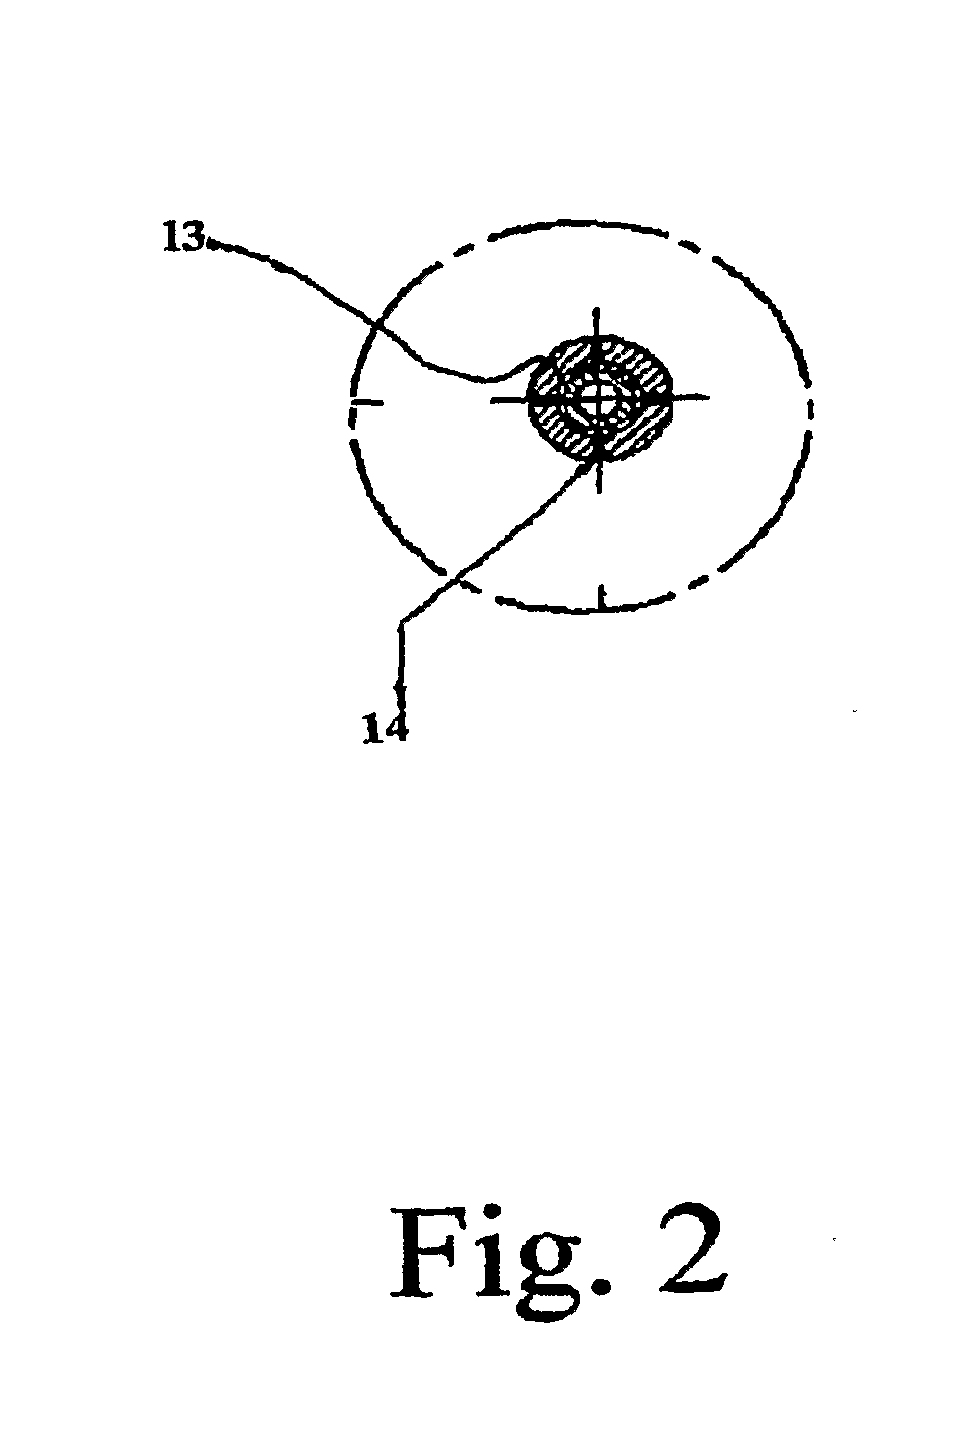 Article and method for openings in lumens